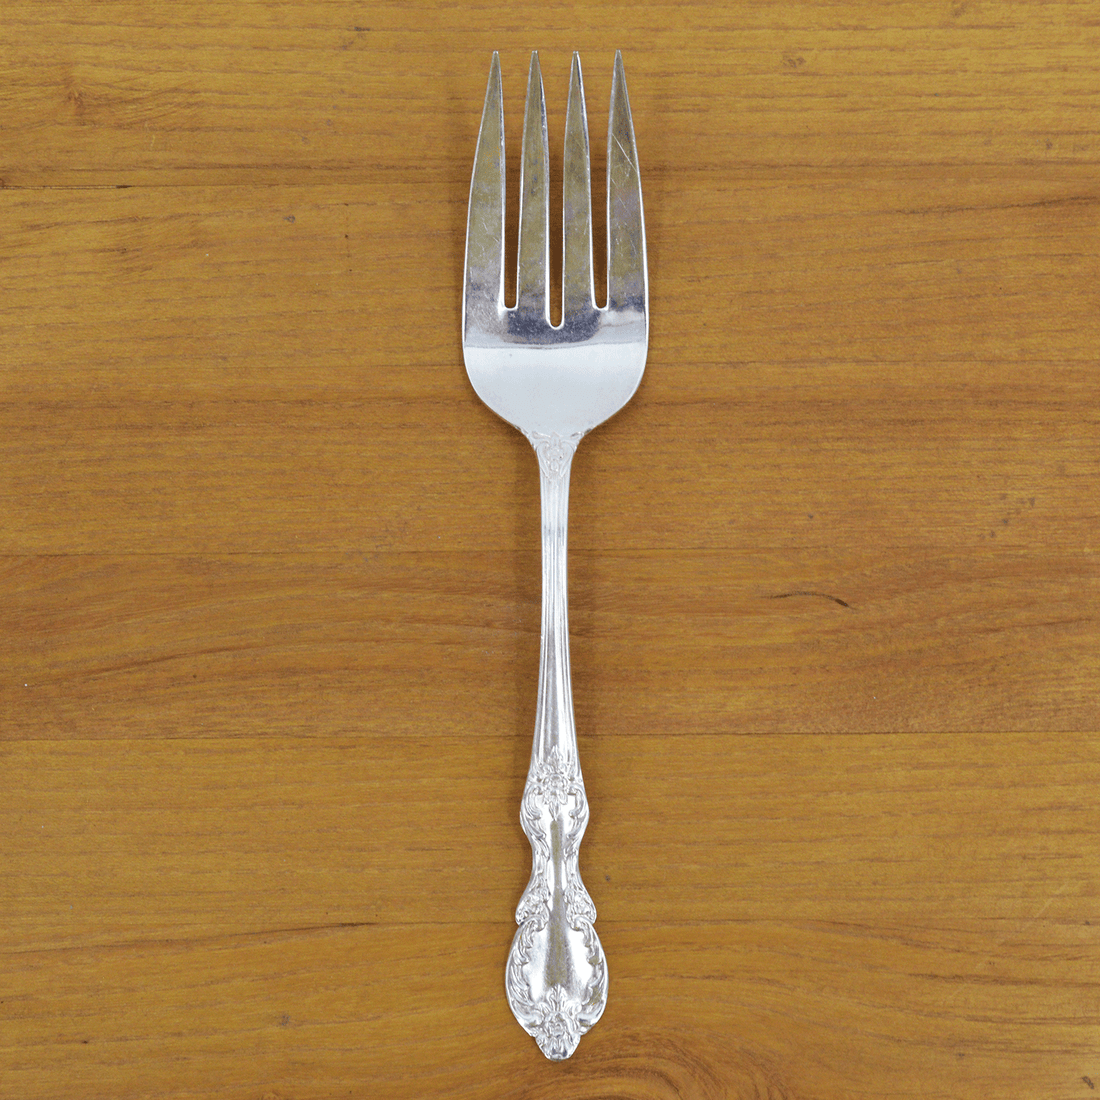 A Hester &amp; Cook vintage silver-plate meat fork resting on a folded green napkin with pom-pom trim on a marble countertop.